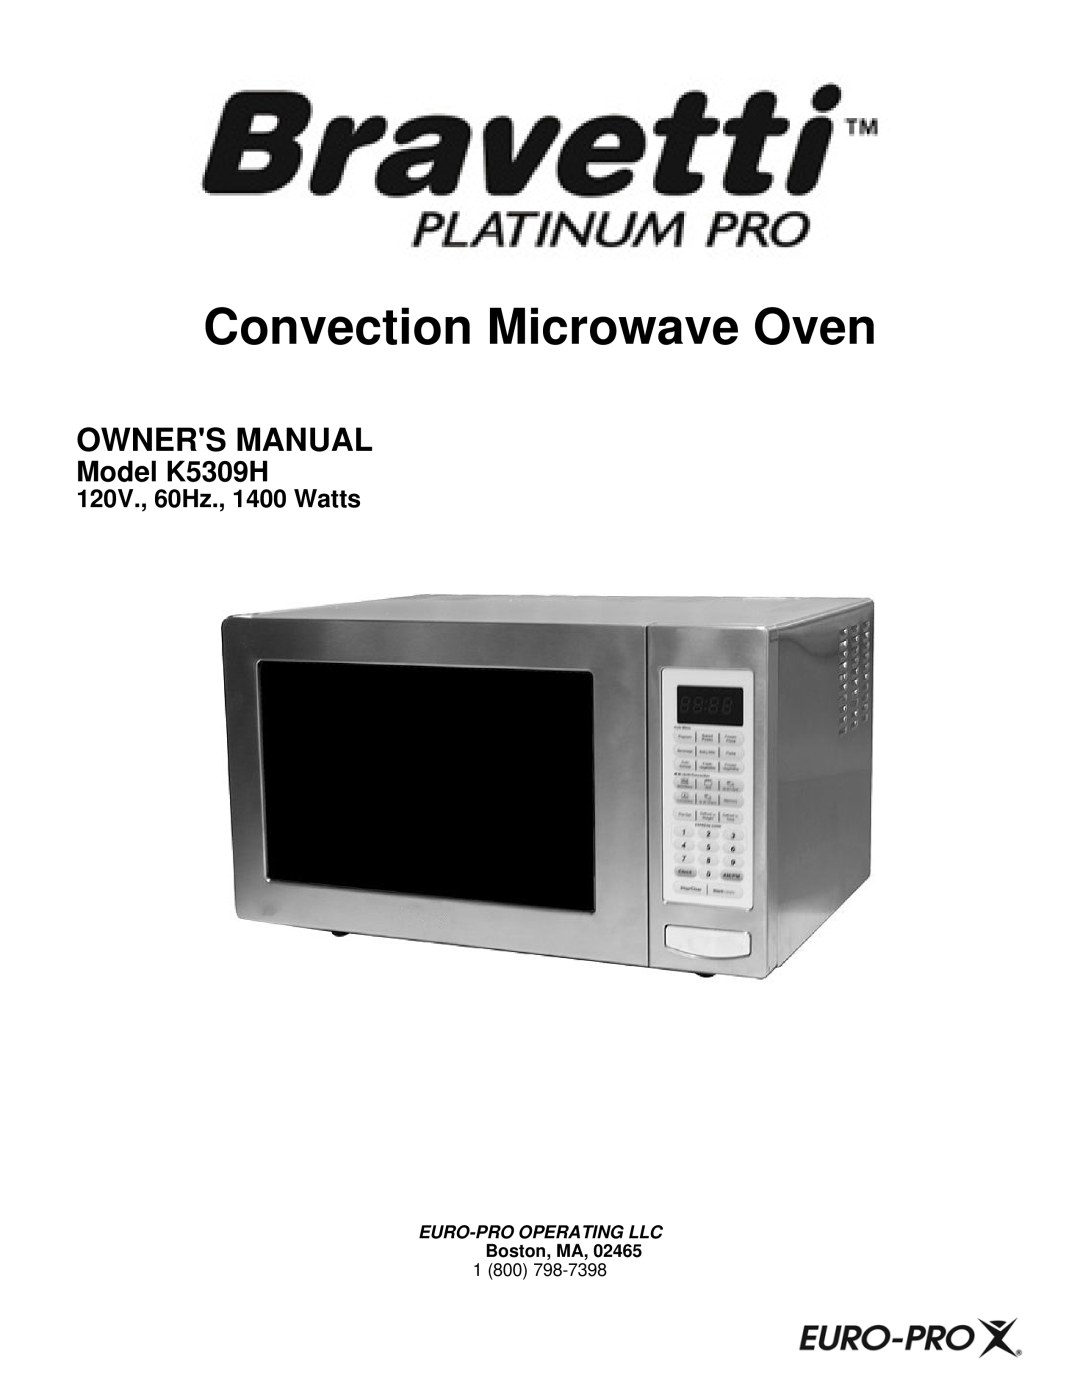 Euro-Pro owner manual Model K5309H, 120V., 60Hz., 1400 Watts, Convection Microwave Oven, Euro-Prooperating Llc 